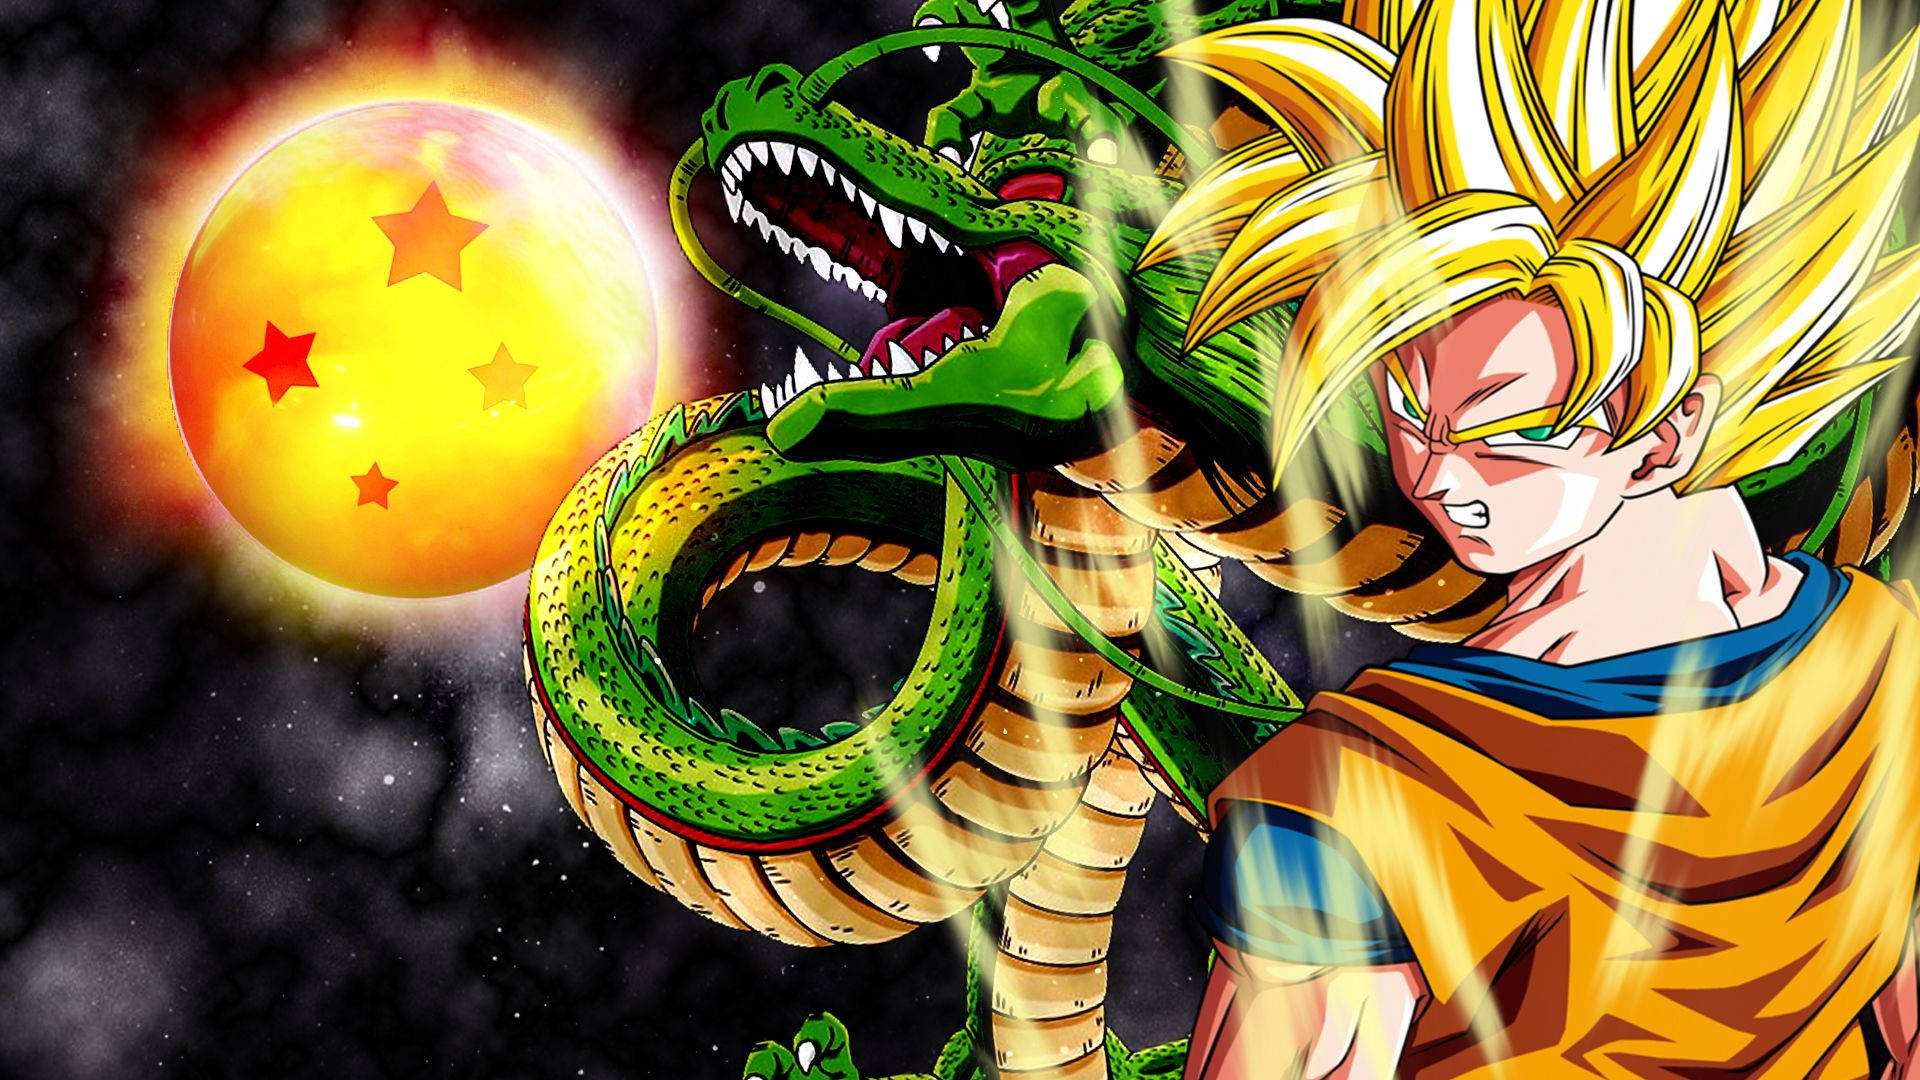 Dragon Ball Z 1920X1080 Wallpaper and Background Image